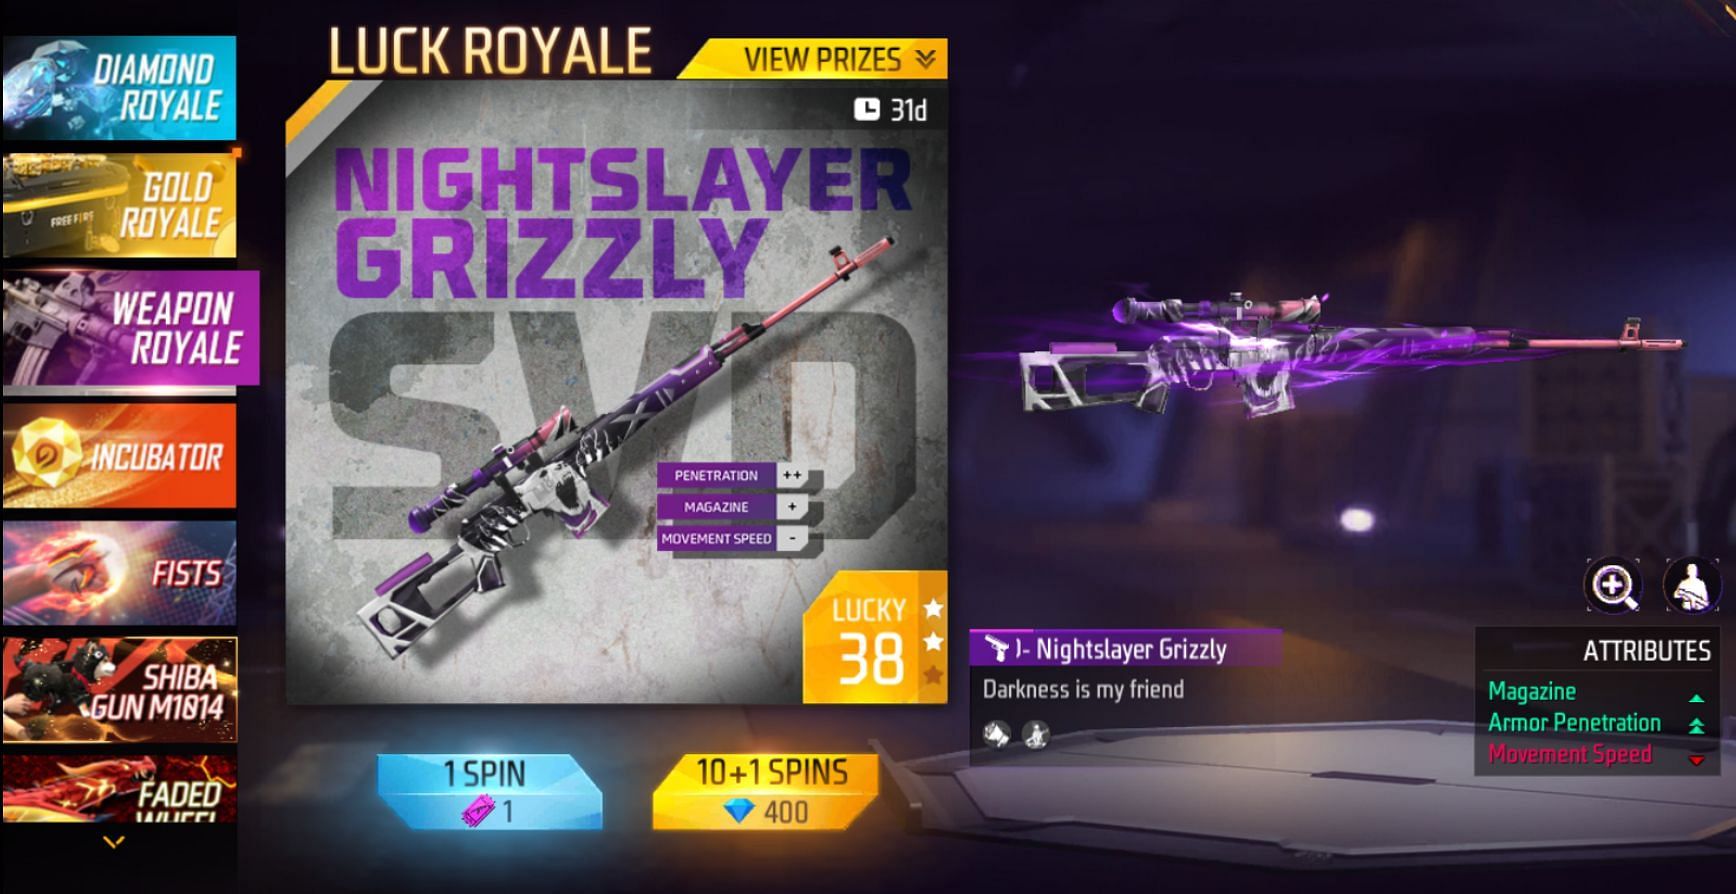 Brand new Weapon Royale rewards are available in the game now (Image via Garena)